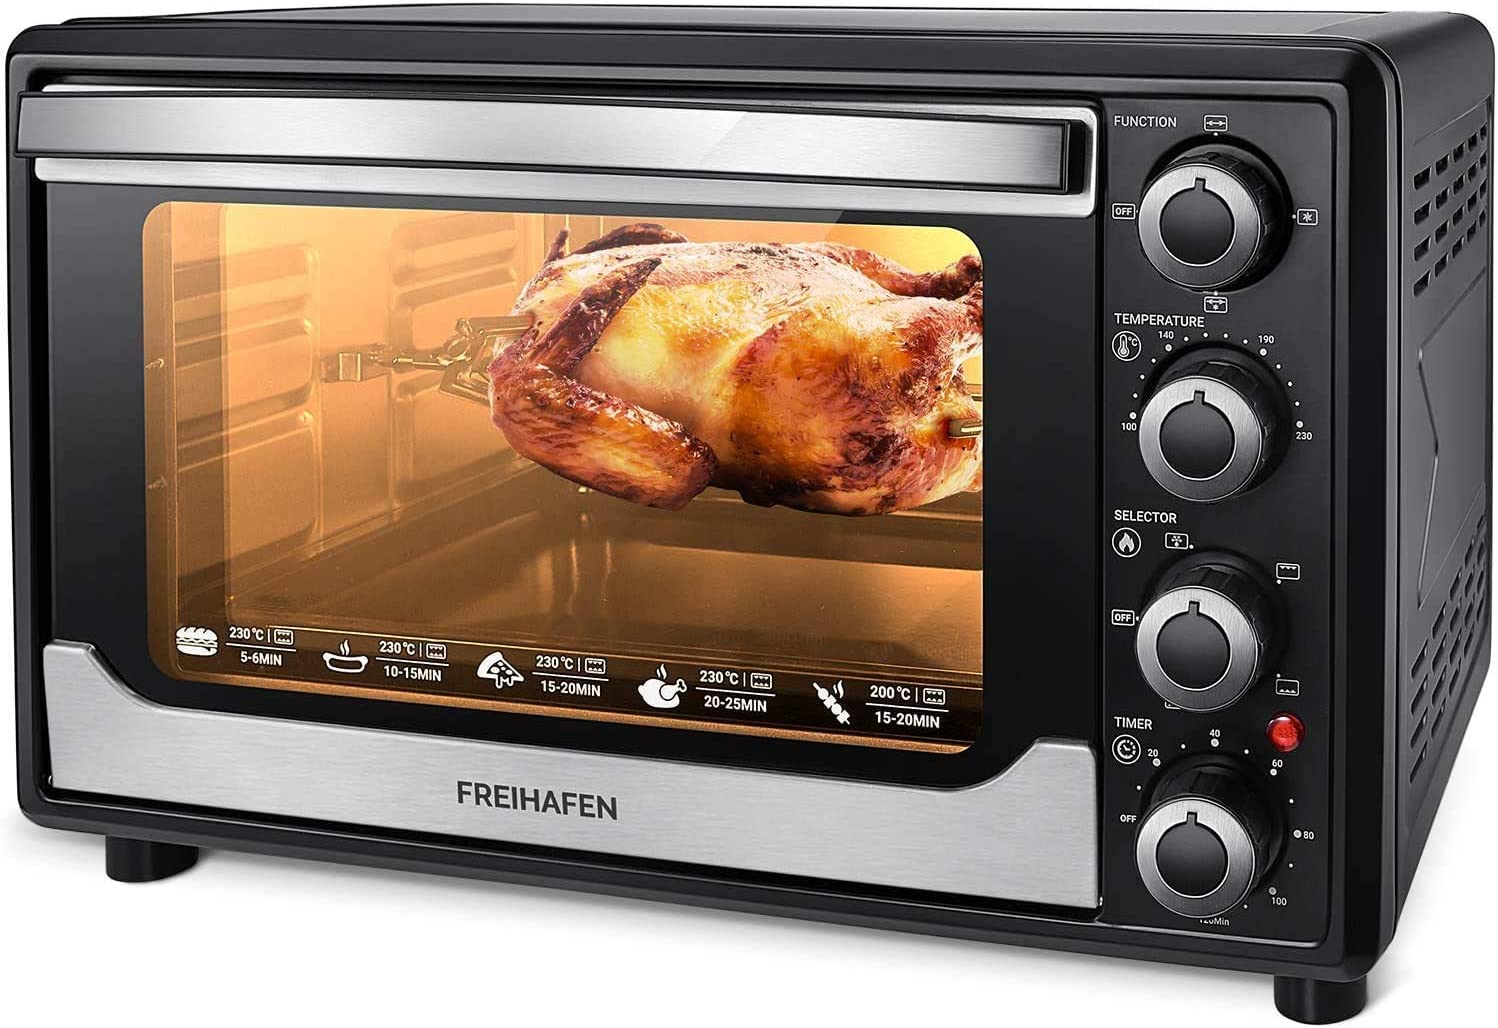 Mini Oven with Circulation, Freihafen 30 Litre 1500 W Mini Oven with 6 Cooking Modes, Defrost Function, Interior Lighting, Removable Crumb Tray, Timer, Ideal for Offices, Student Homes